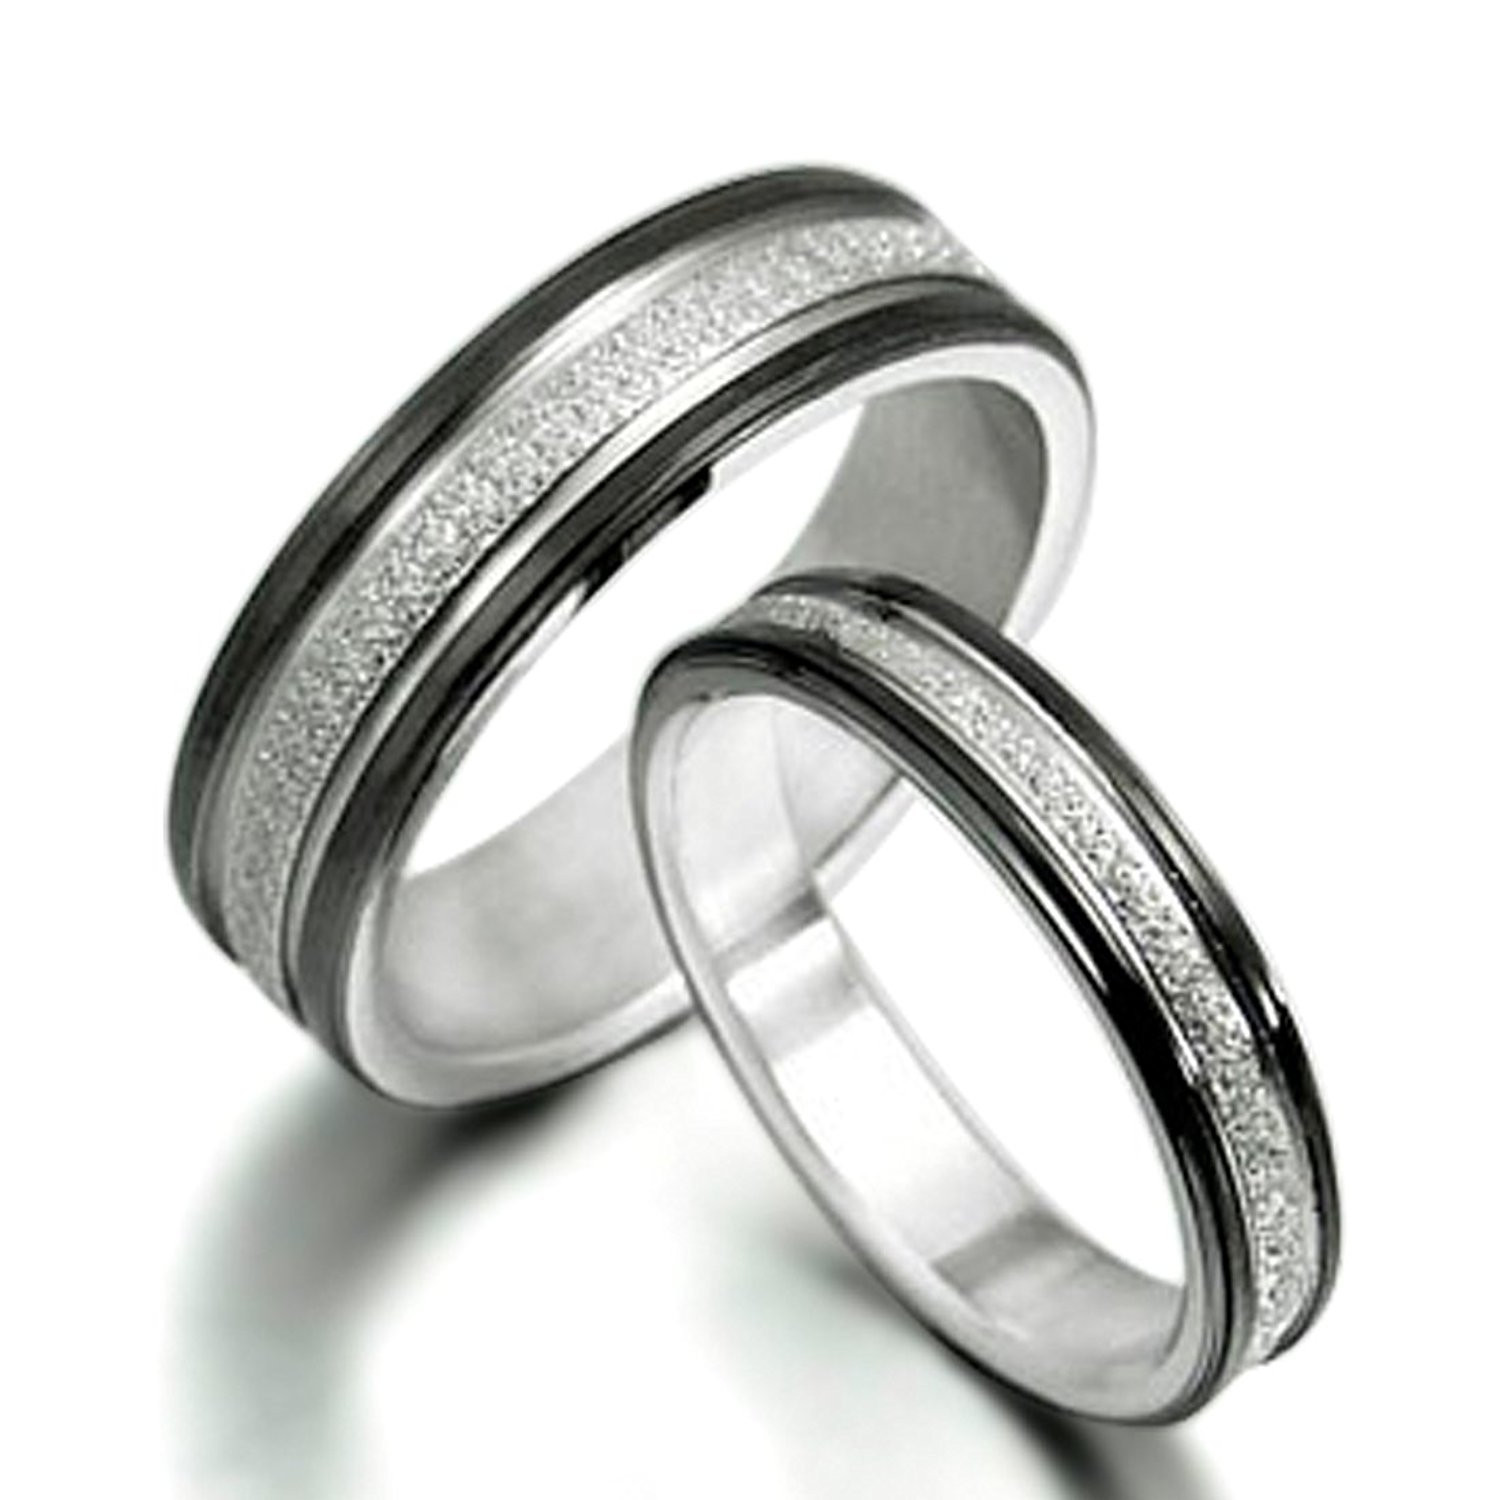 Cheap Matching Wedding Bands
 Awesome His and Hers Matching Wedding Bands Titanium